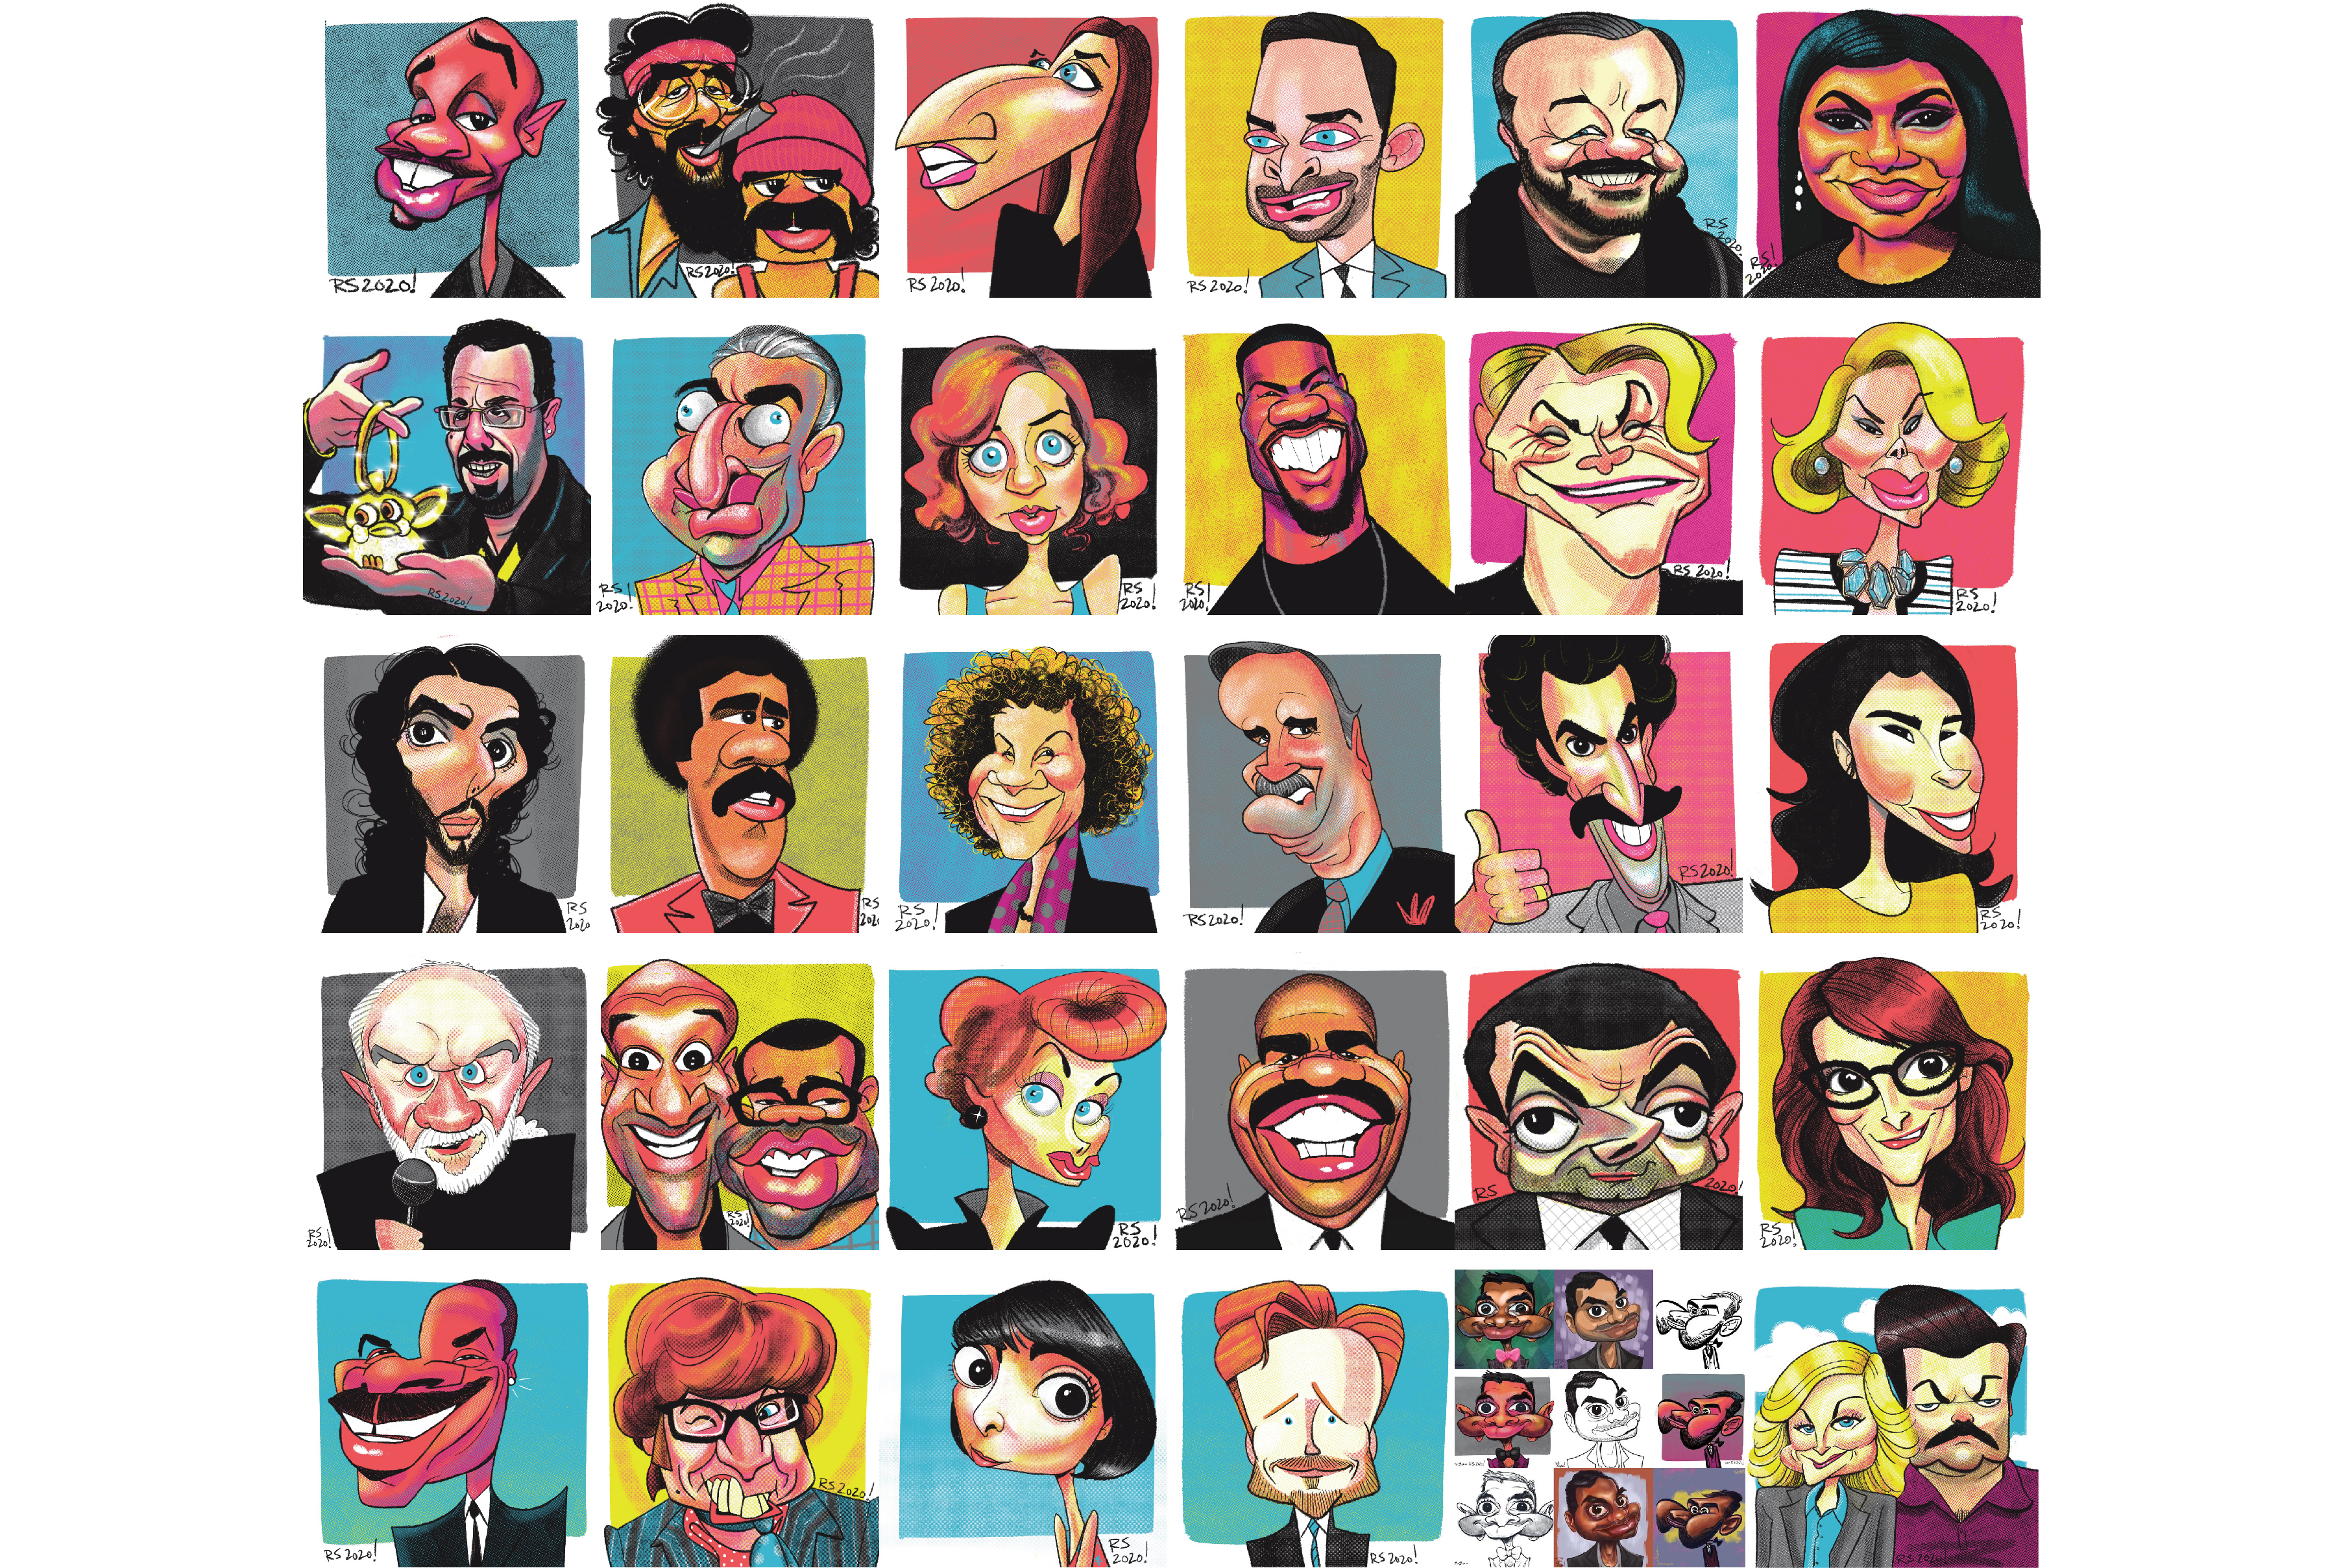 Grid of caricature drawings featuring 30 celebrities